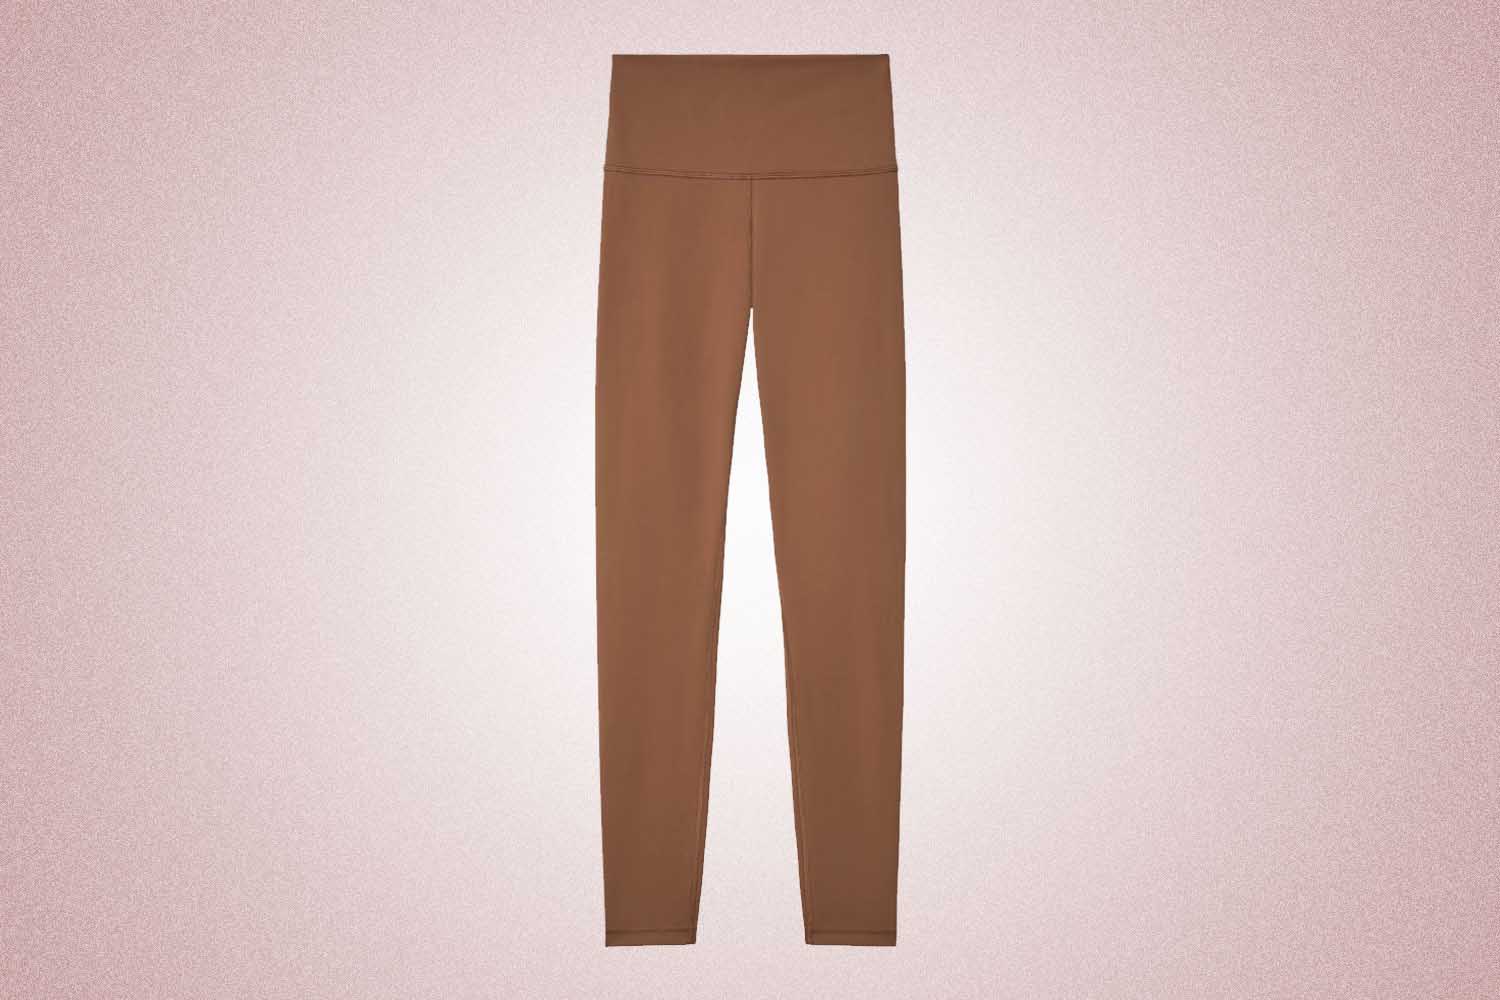 Tan workout leggings from Everlane, a perfect Valentine’s Day gift for 2022, on a pink background.